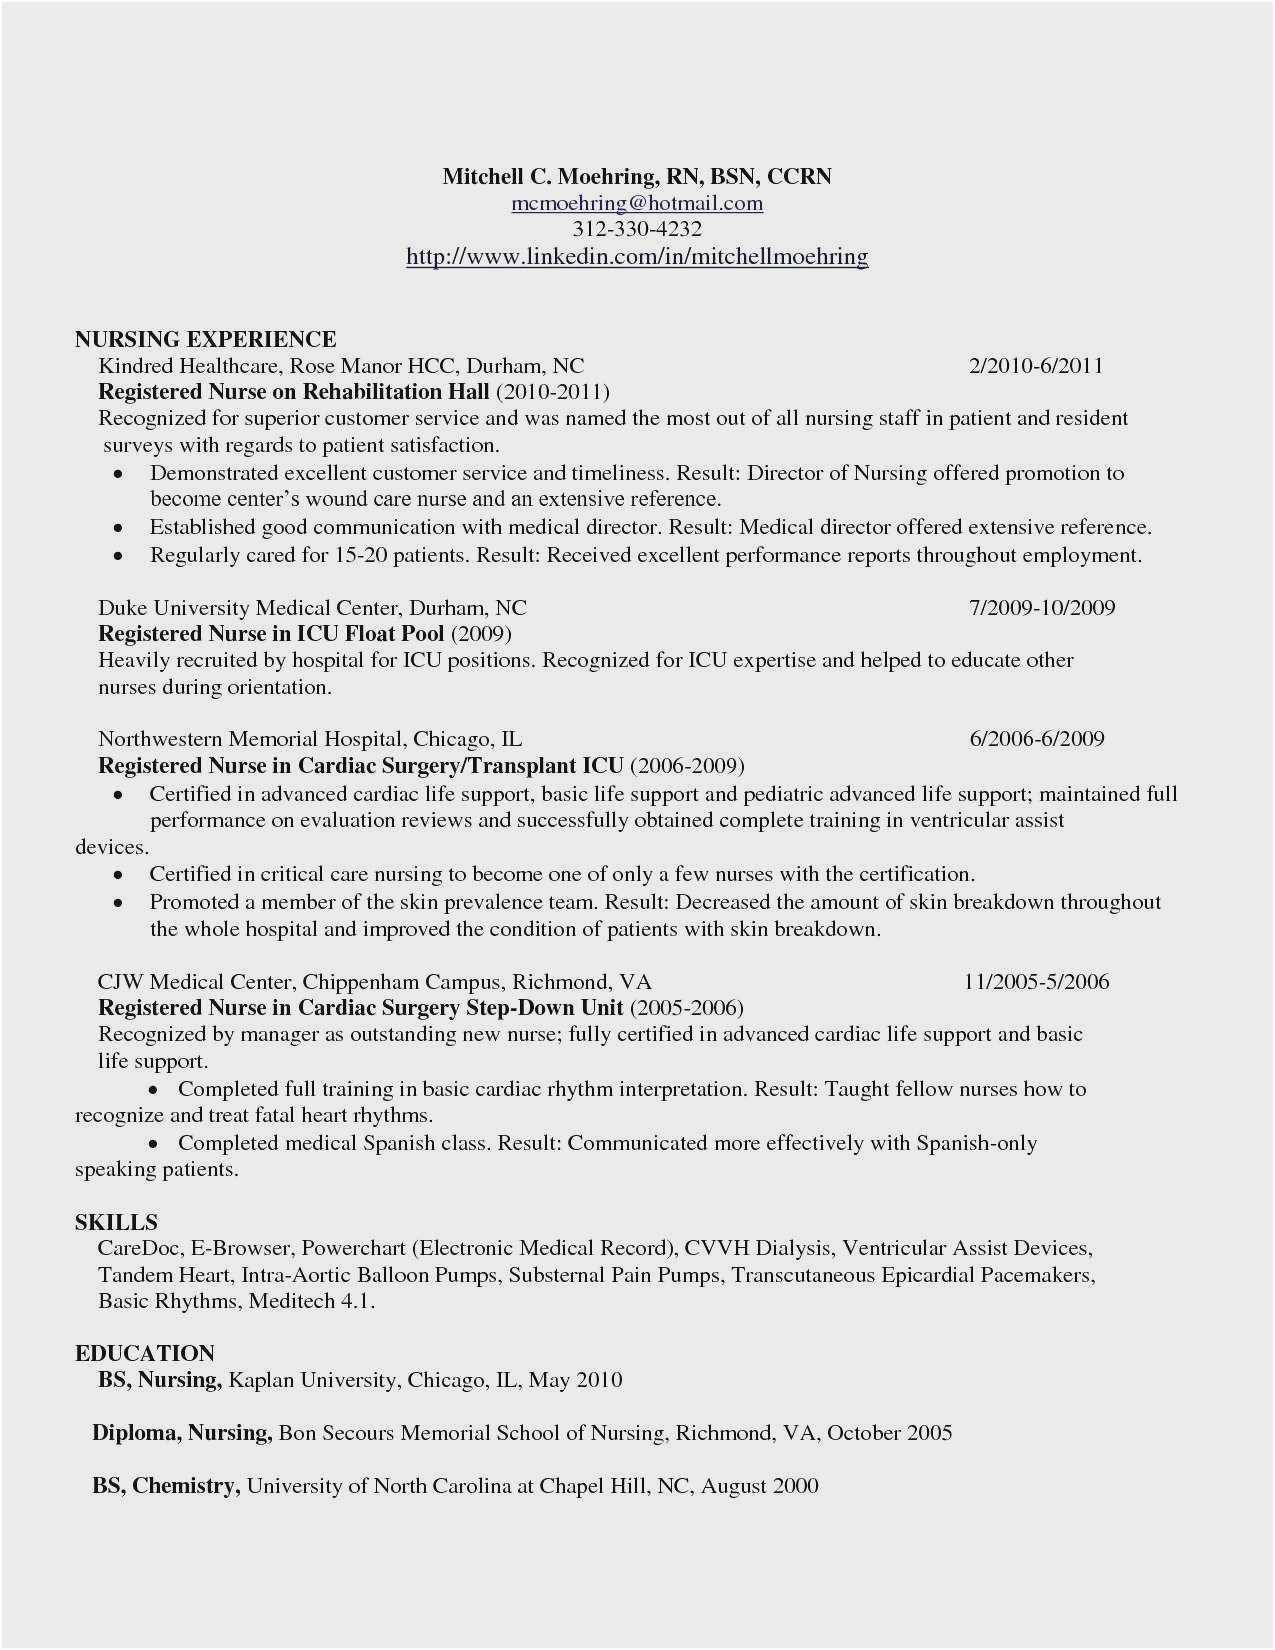 Resume Sample for Administrative assistant with No Experience Free Collection 51 Resume with No Experience 2019